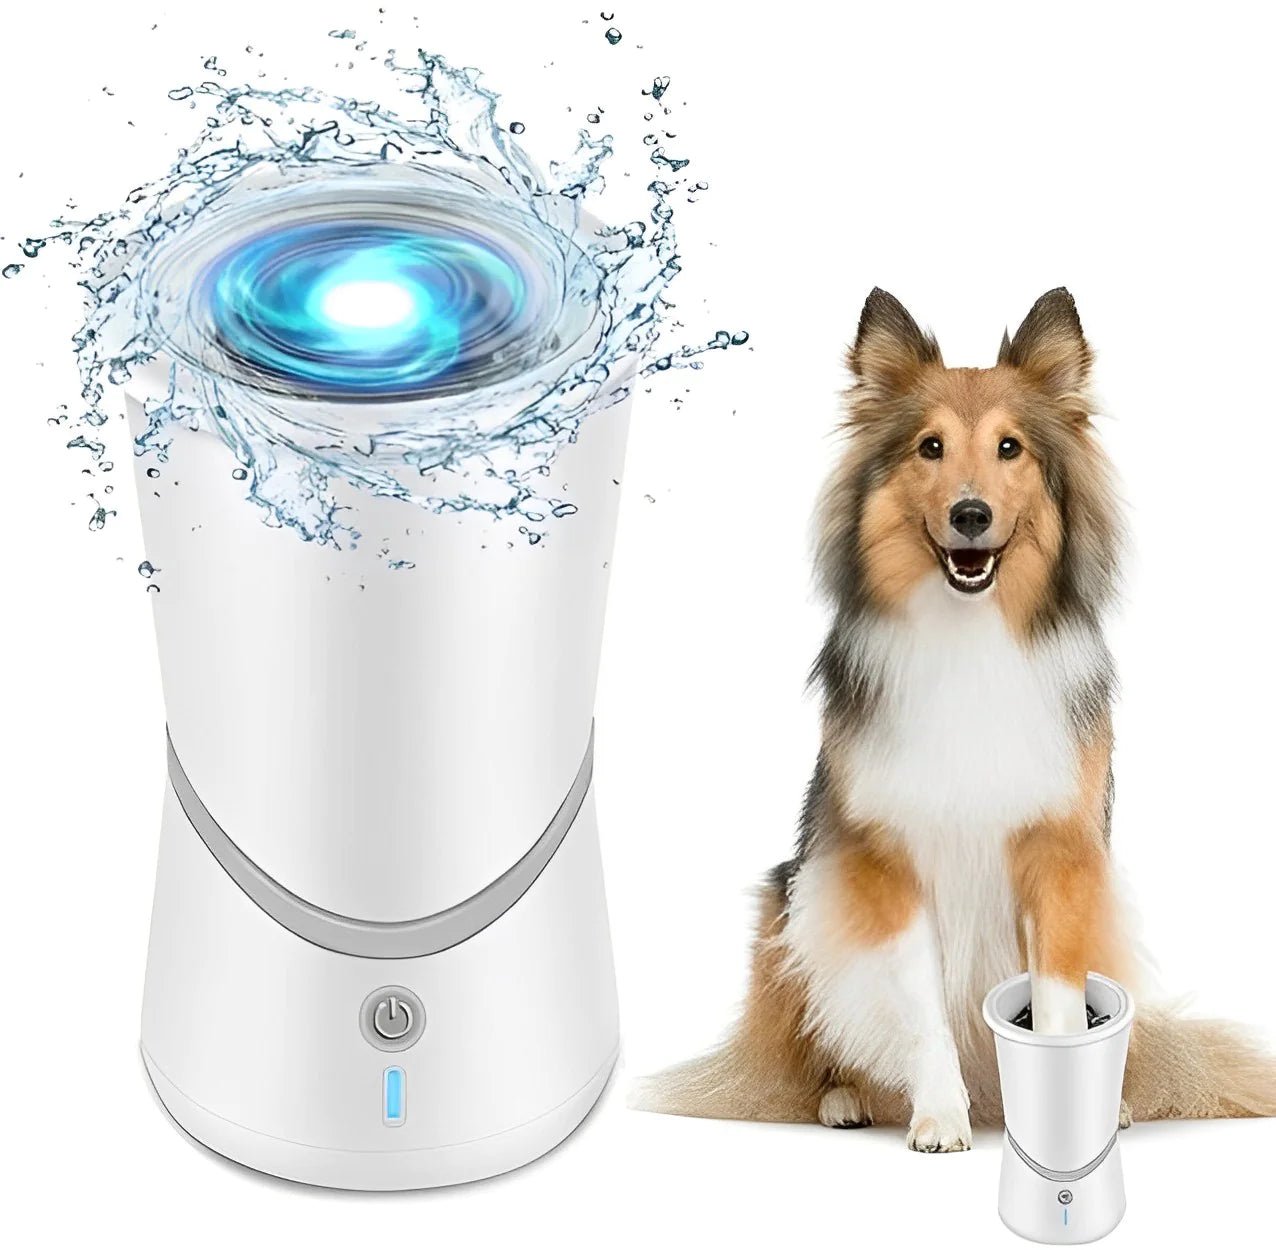 Electric Dog Paw Washing Cup - Keep Your Pup's Paws Clean and Tidy. - craftmasterslate